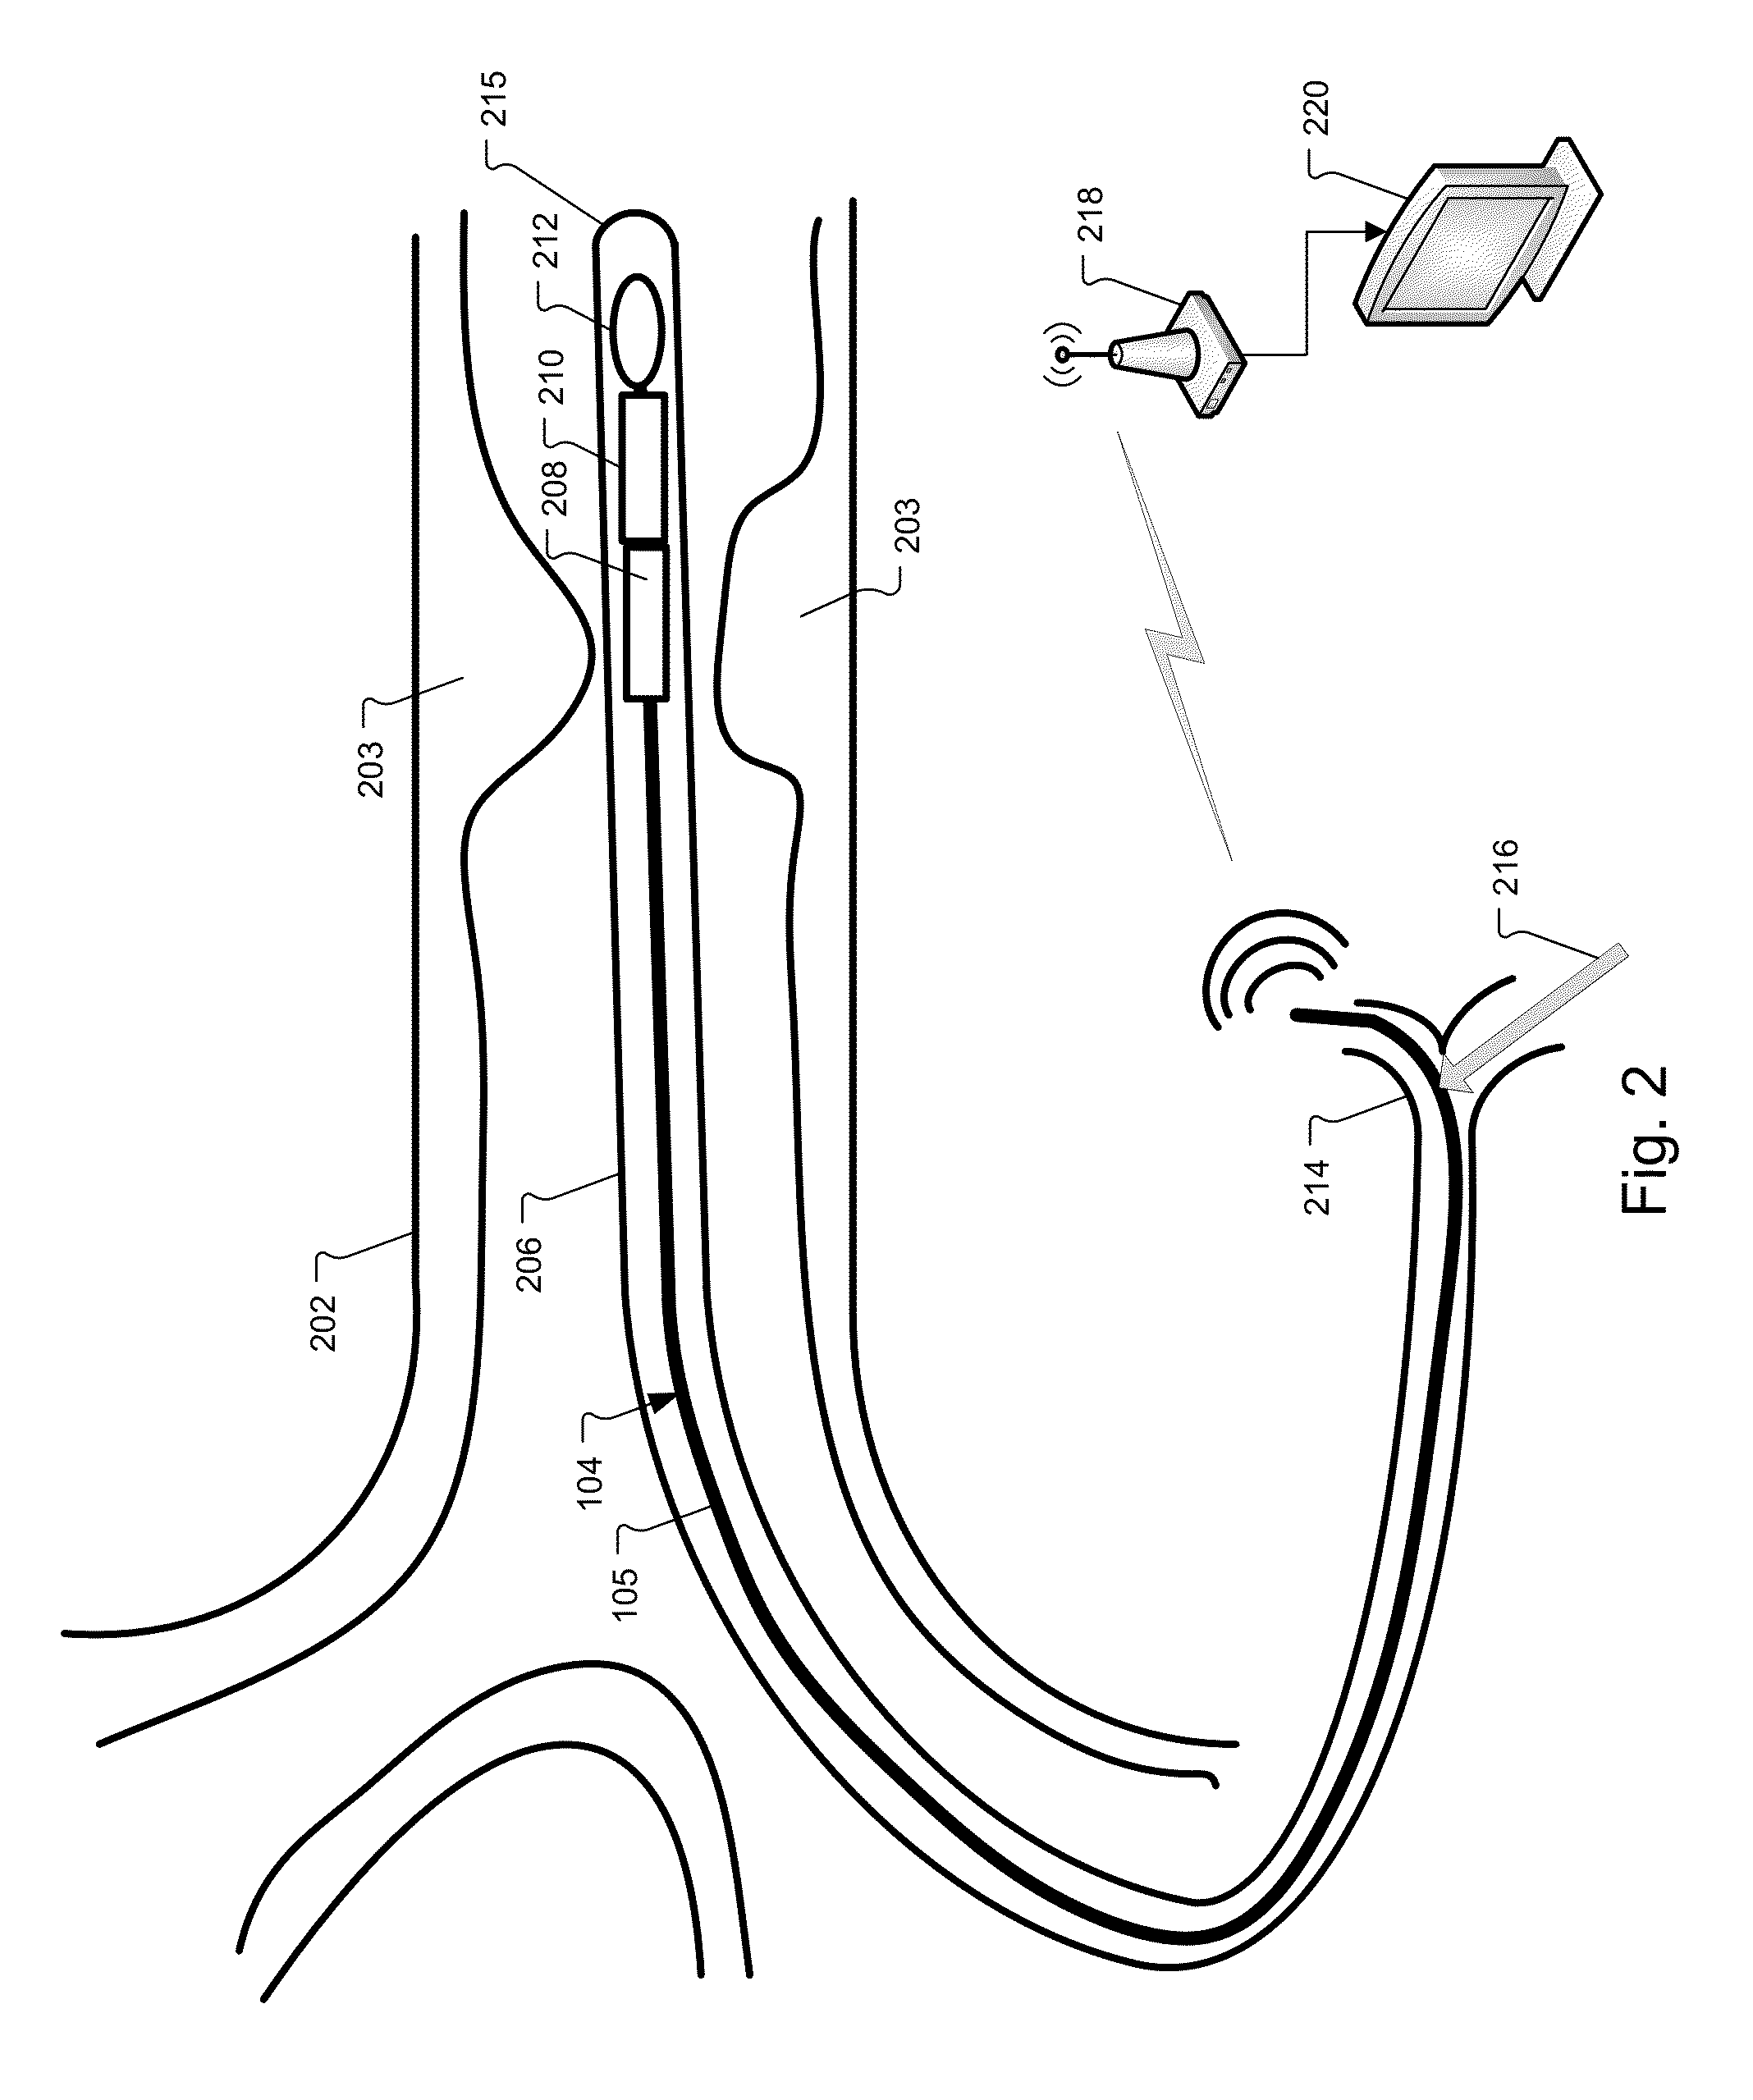 Wireless pressure wire system with integrated power